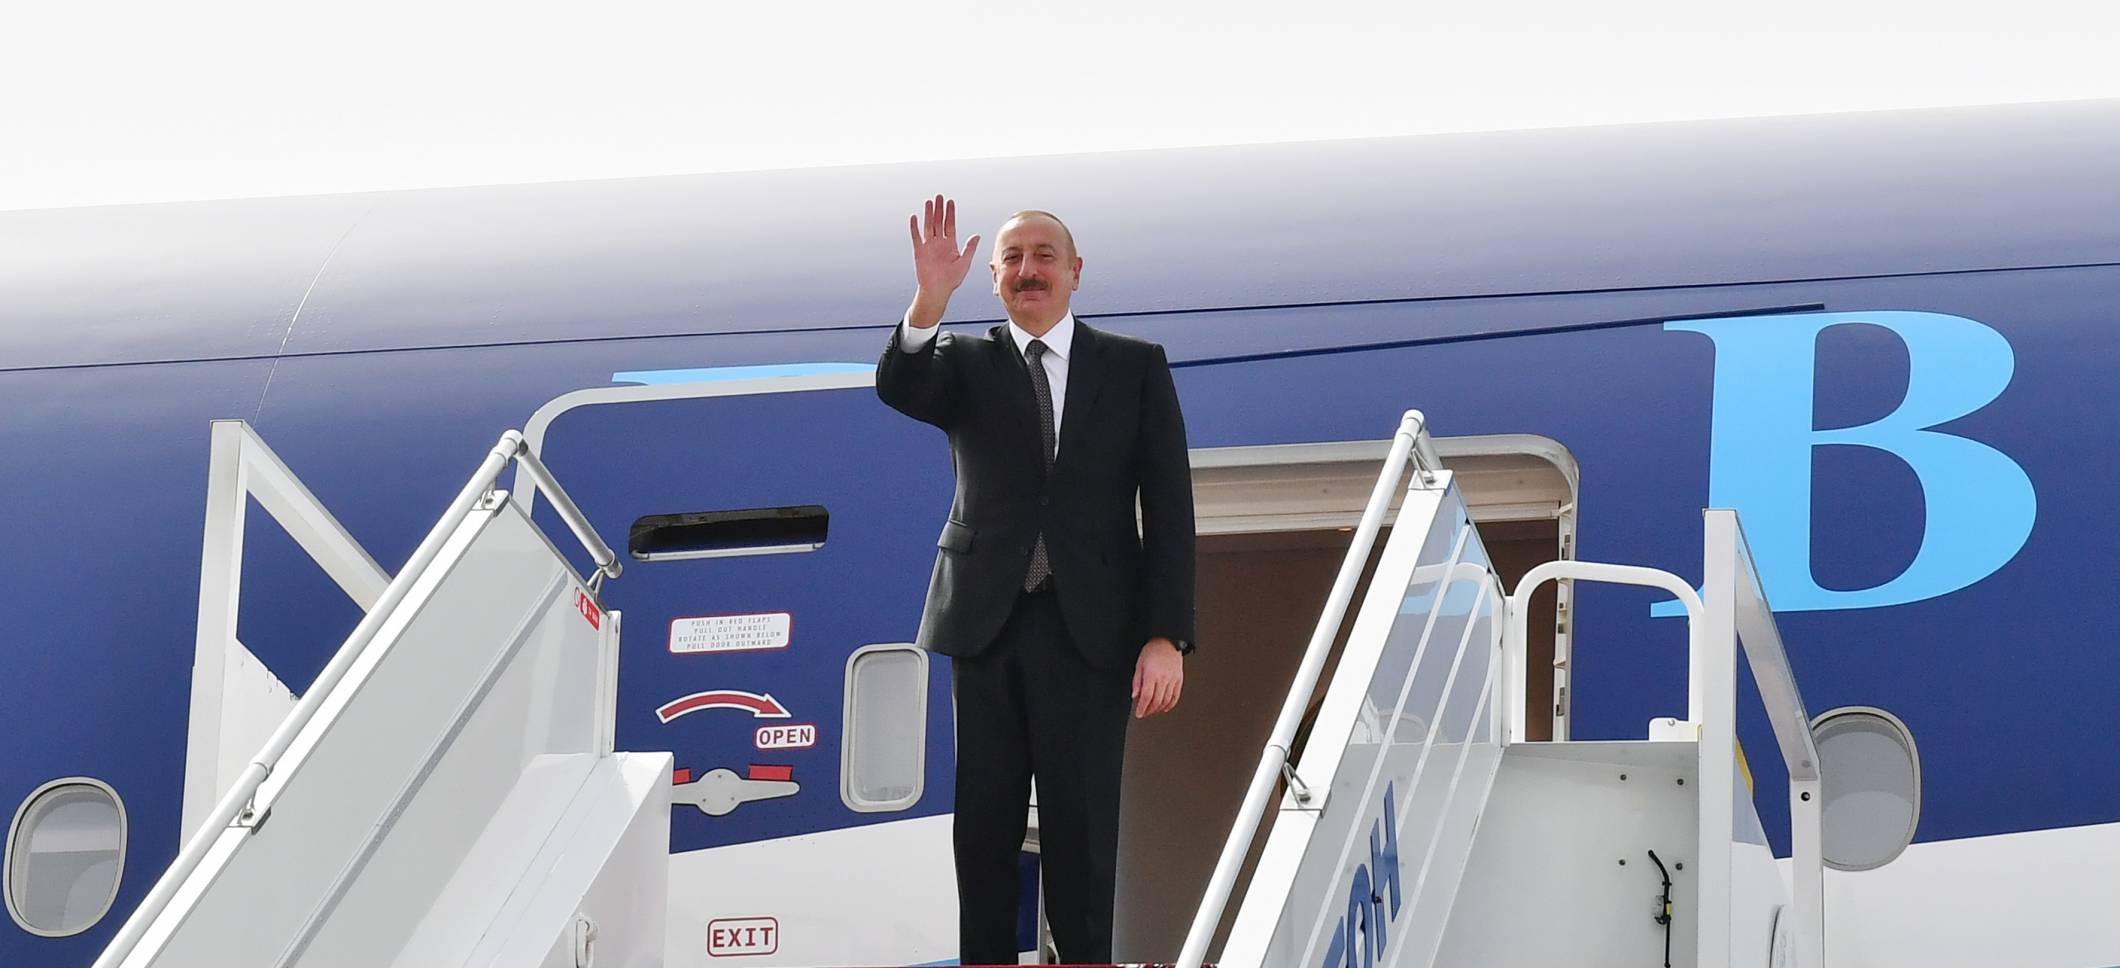 Ilham Aliyev concluded his visit to Tajikistan